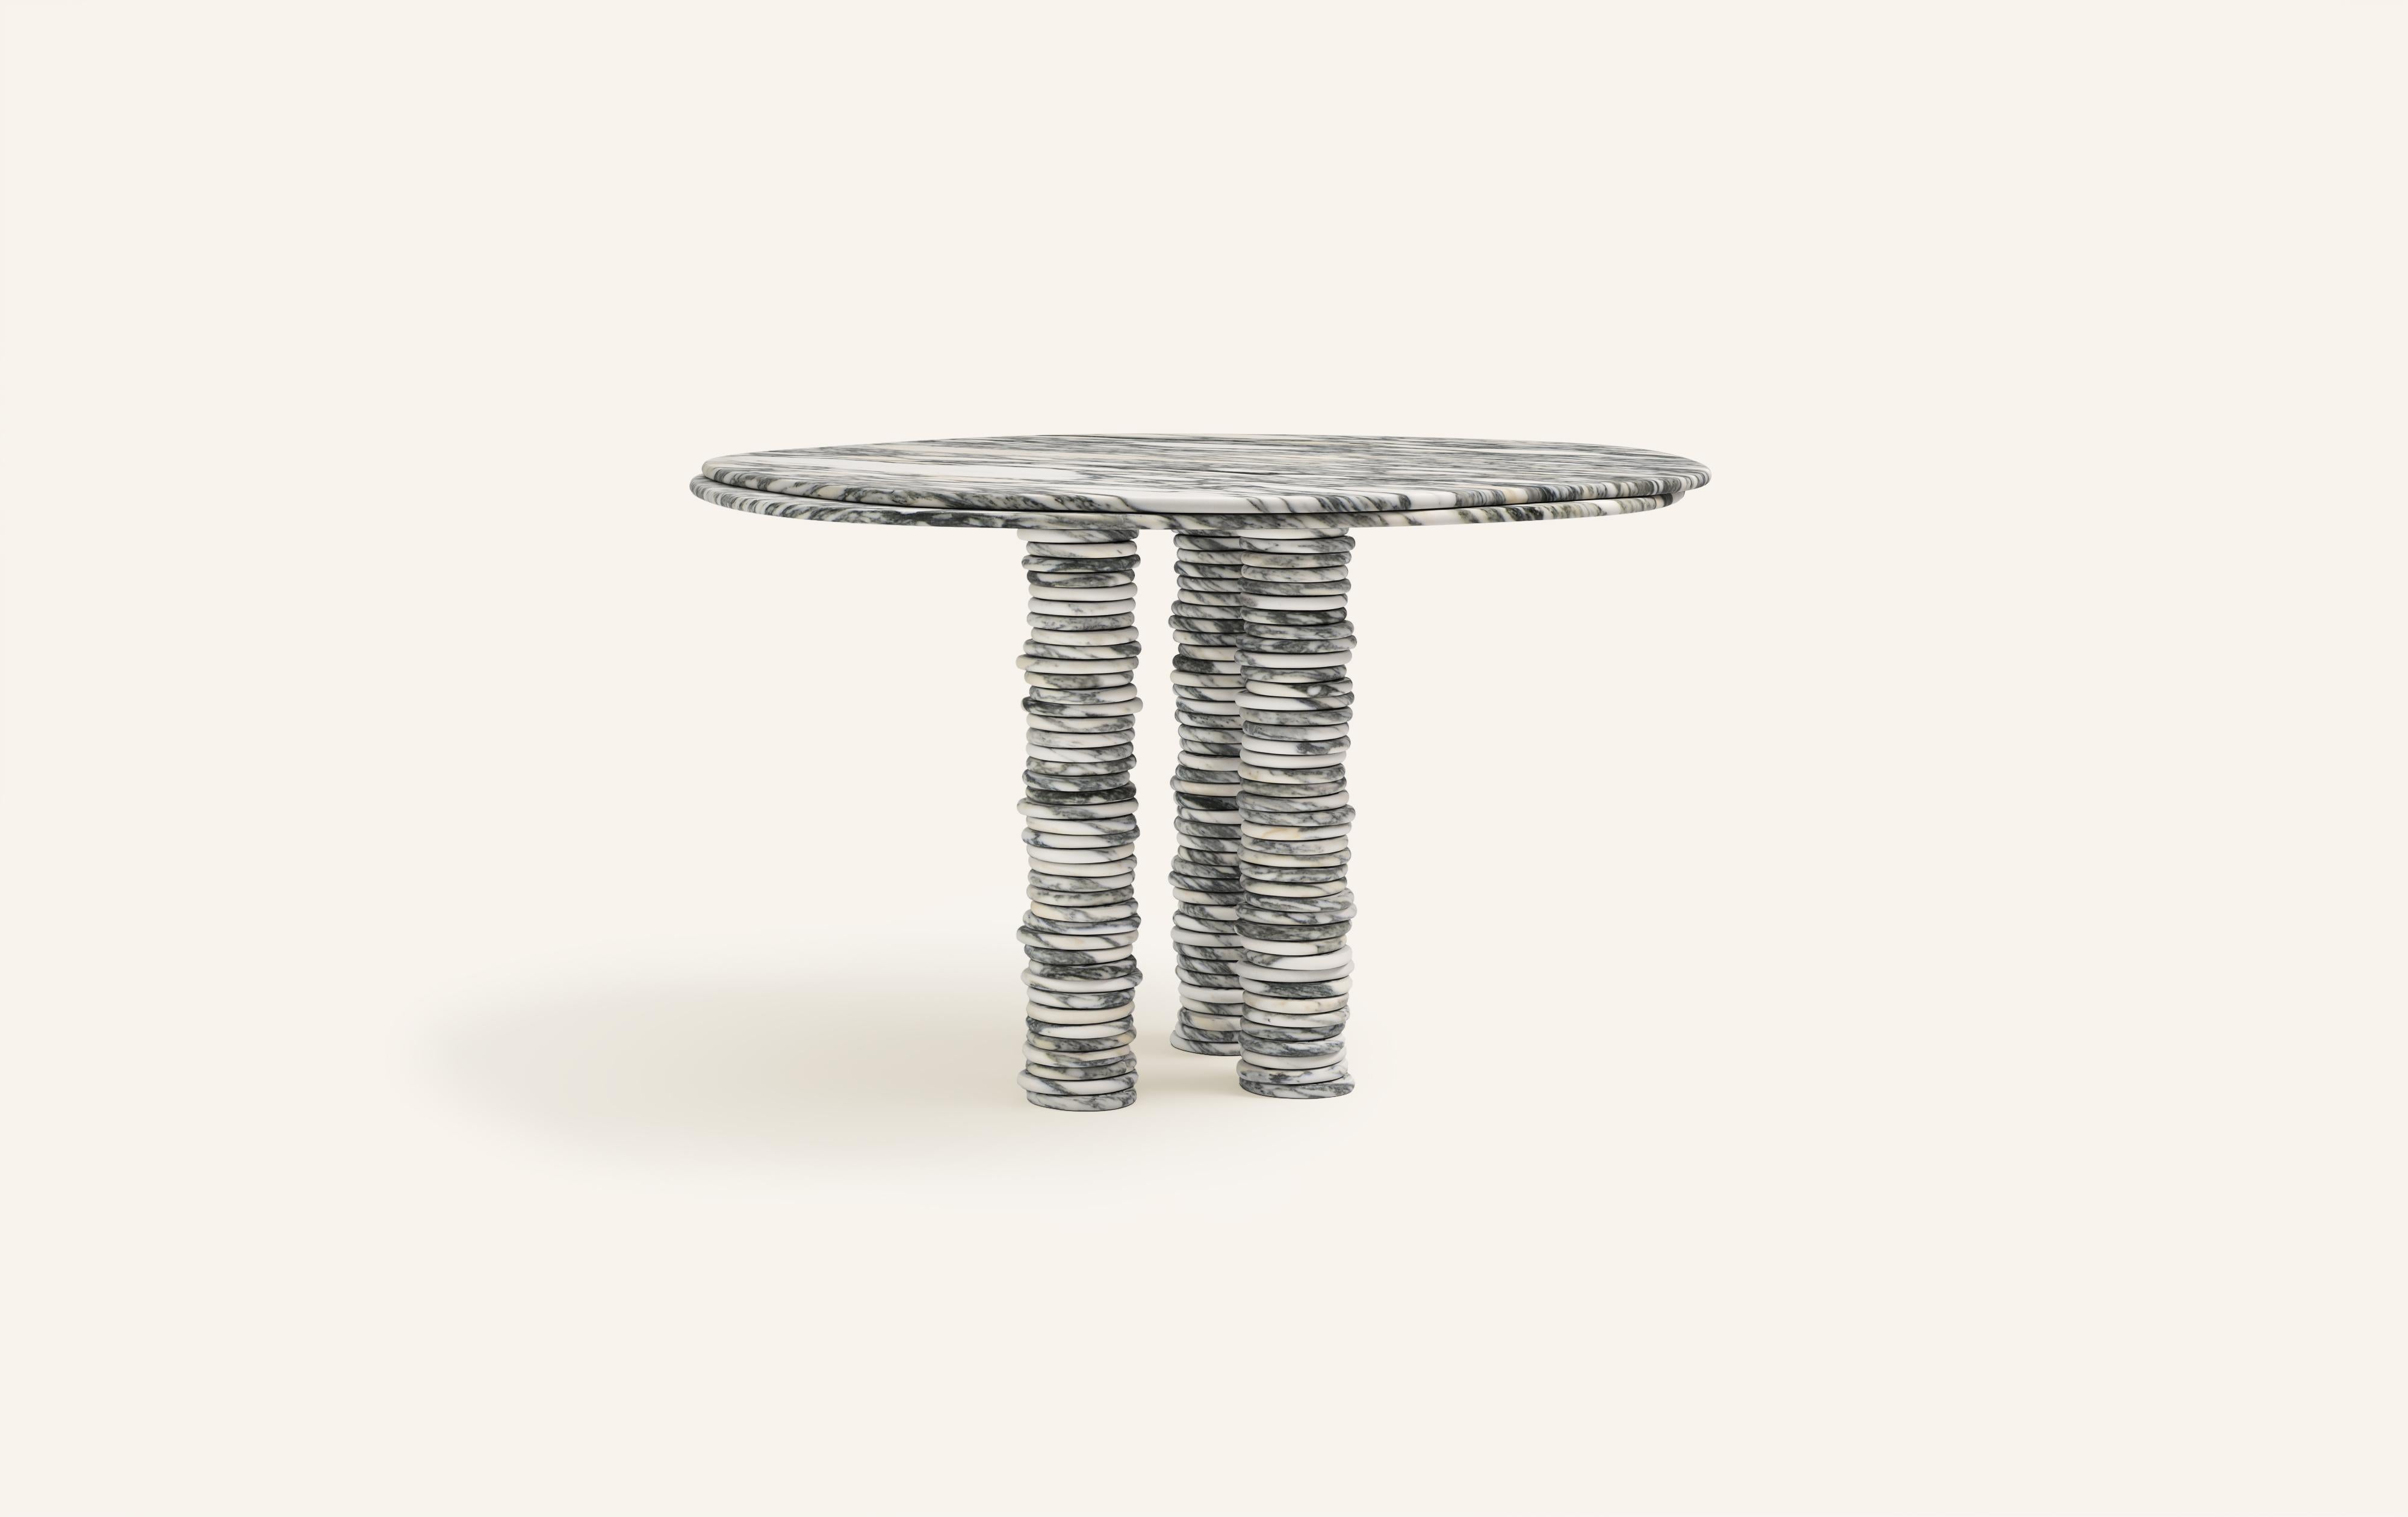 'ONDA', ITALIAN FOR 'WAVE', HAS INSPIRED A FREEFORM ORGANIC BODY, HEROING A COMPLEX AND TEXTURED COLLECTION. COMPRISING SIDE TABLES FOR LAYERING, COFFEE TABLES AND DINING TABLES.

DIMENSIONS:
42”L x 42”W x 29-3/4”H: 
- 1.5